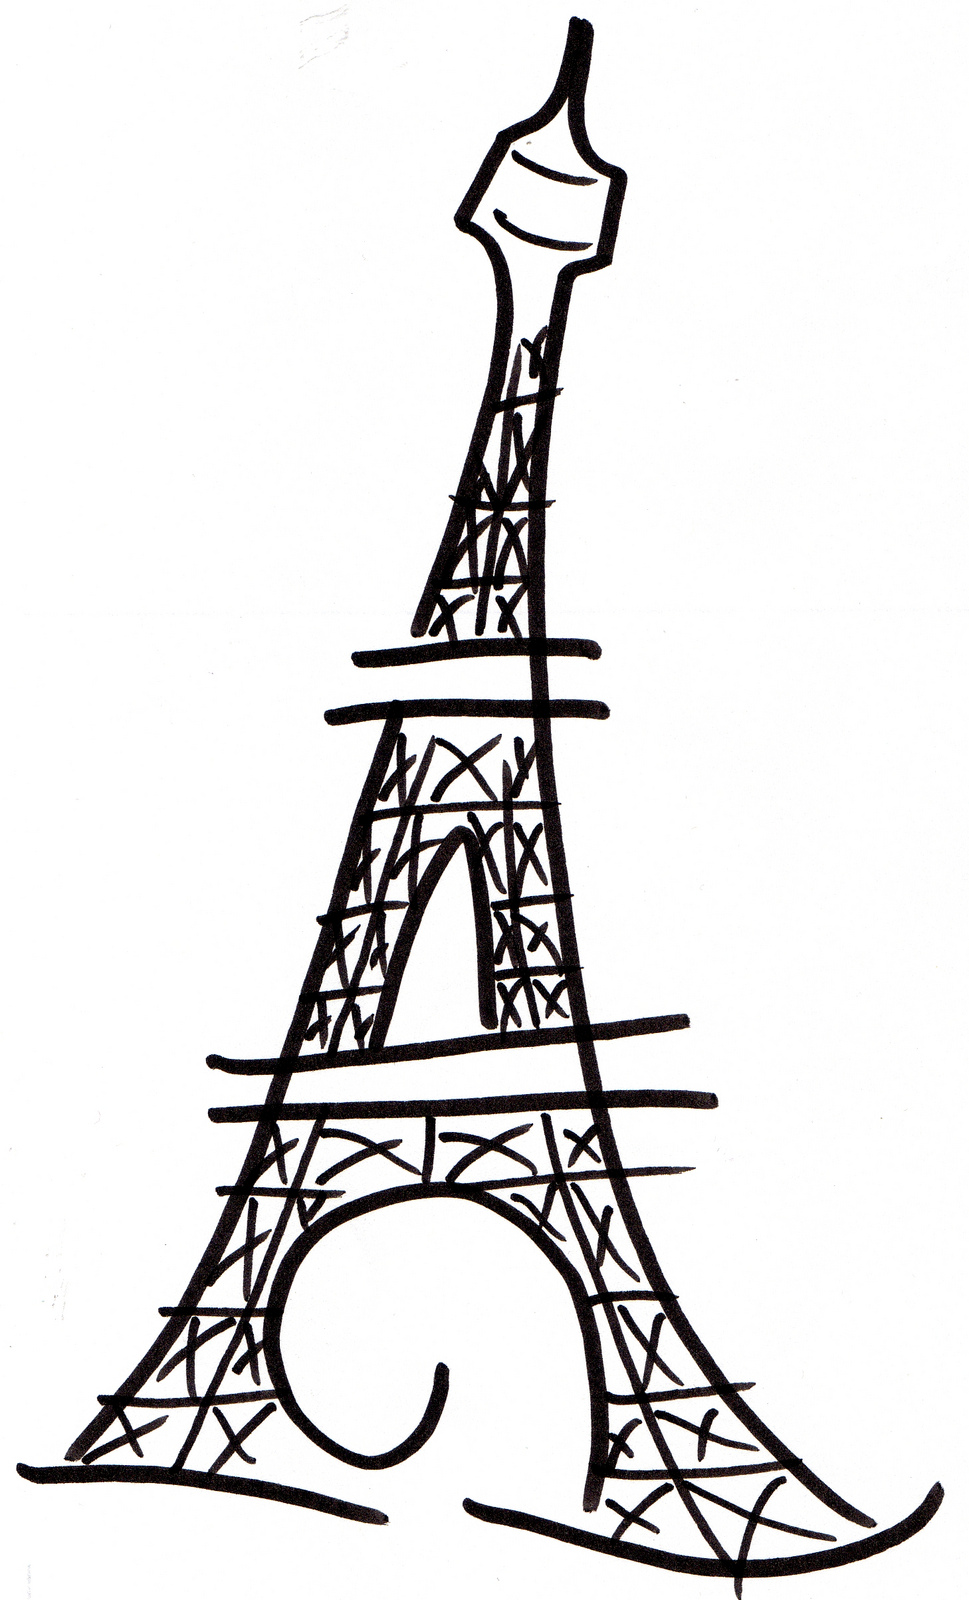 Eiffel Tower Drawing - ClipArt Best